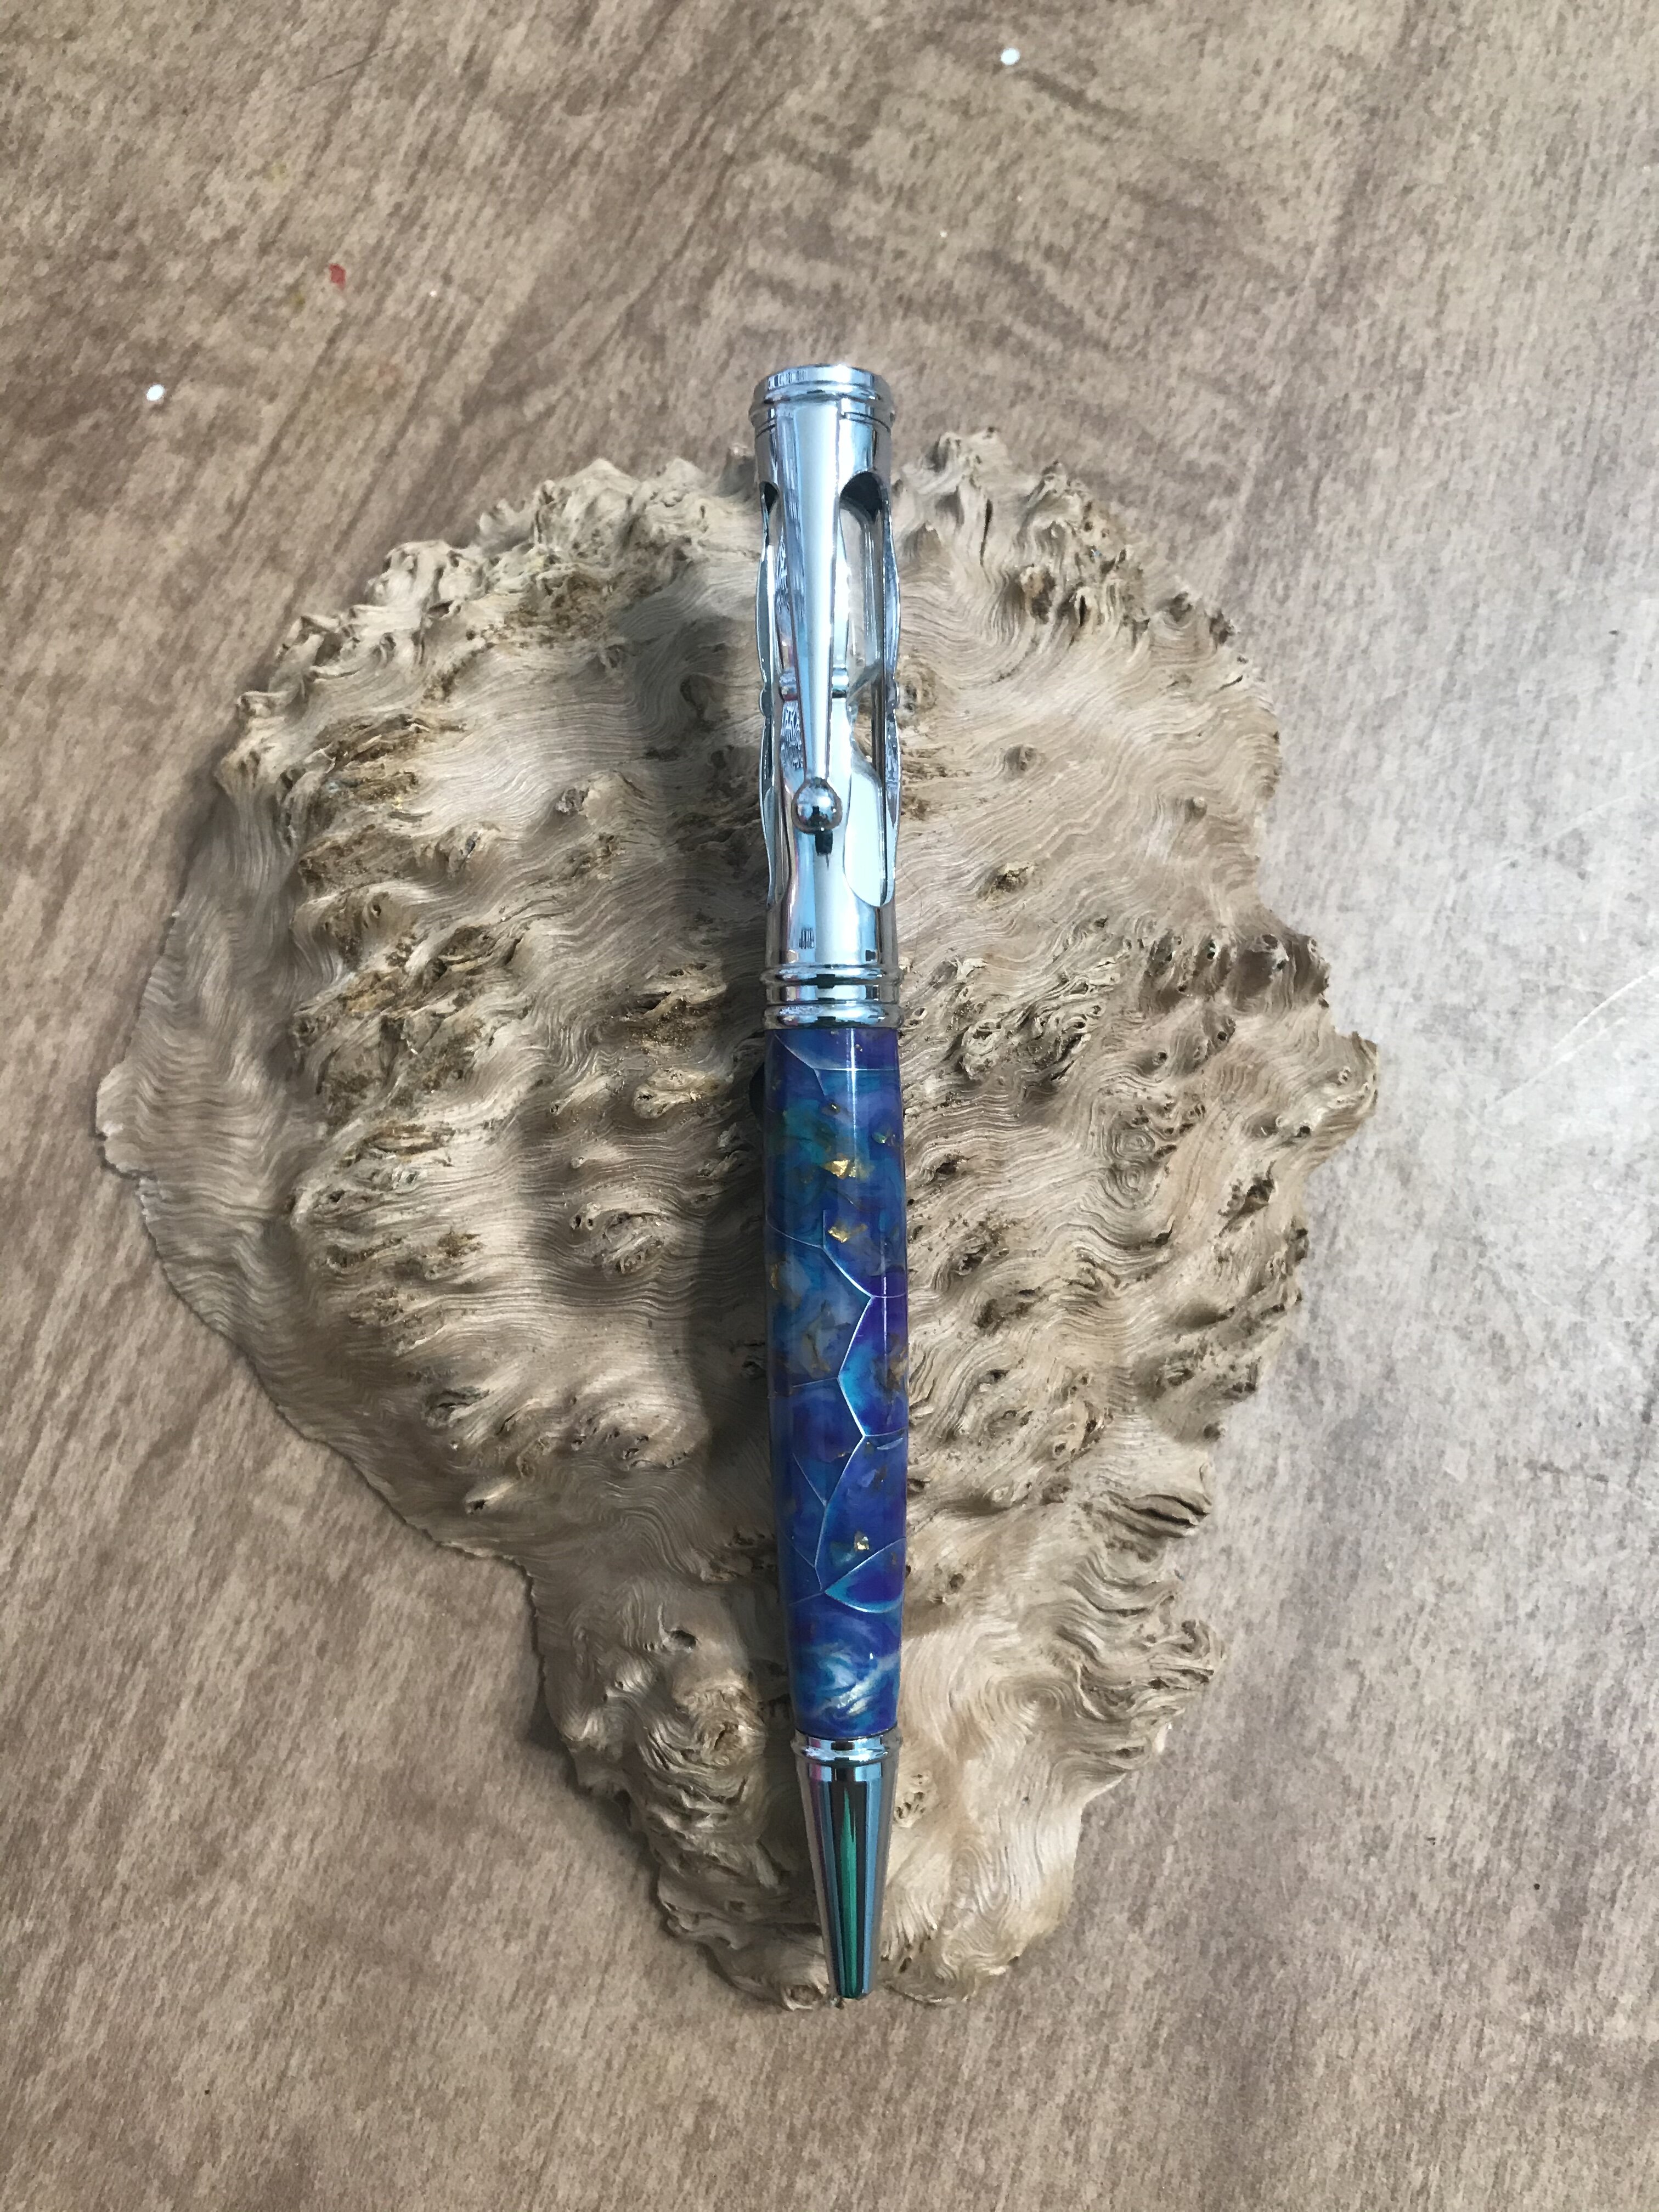 Resin with Aluminum Honeycomb on a Chrome Hour Glass Pen